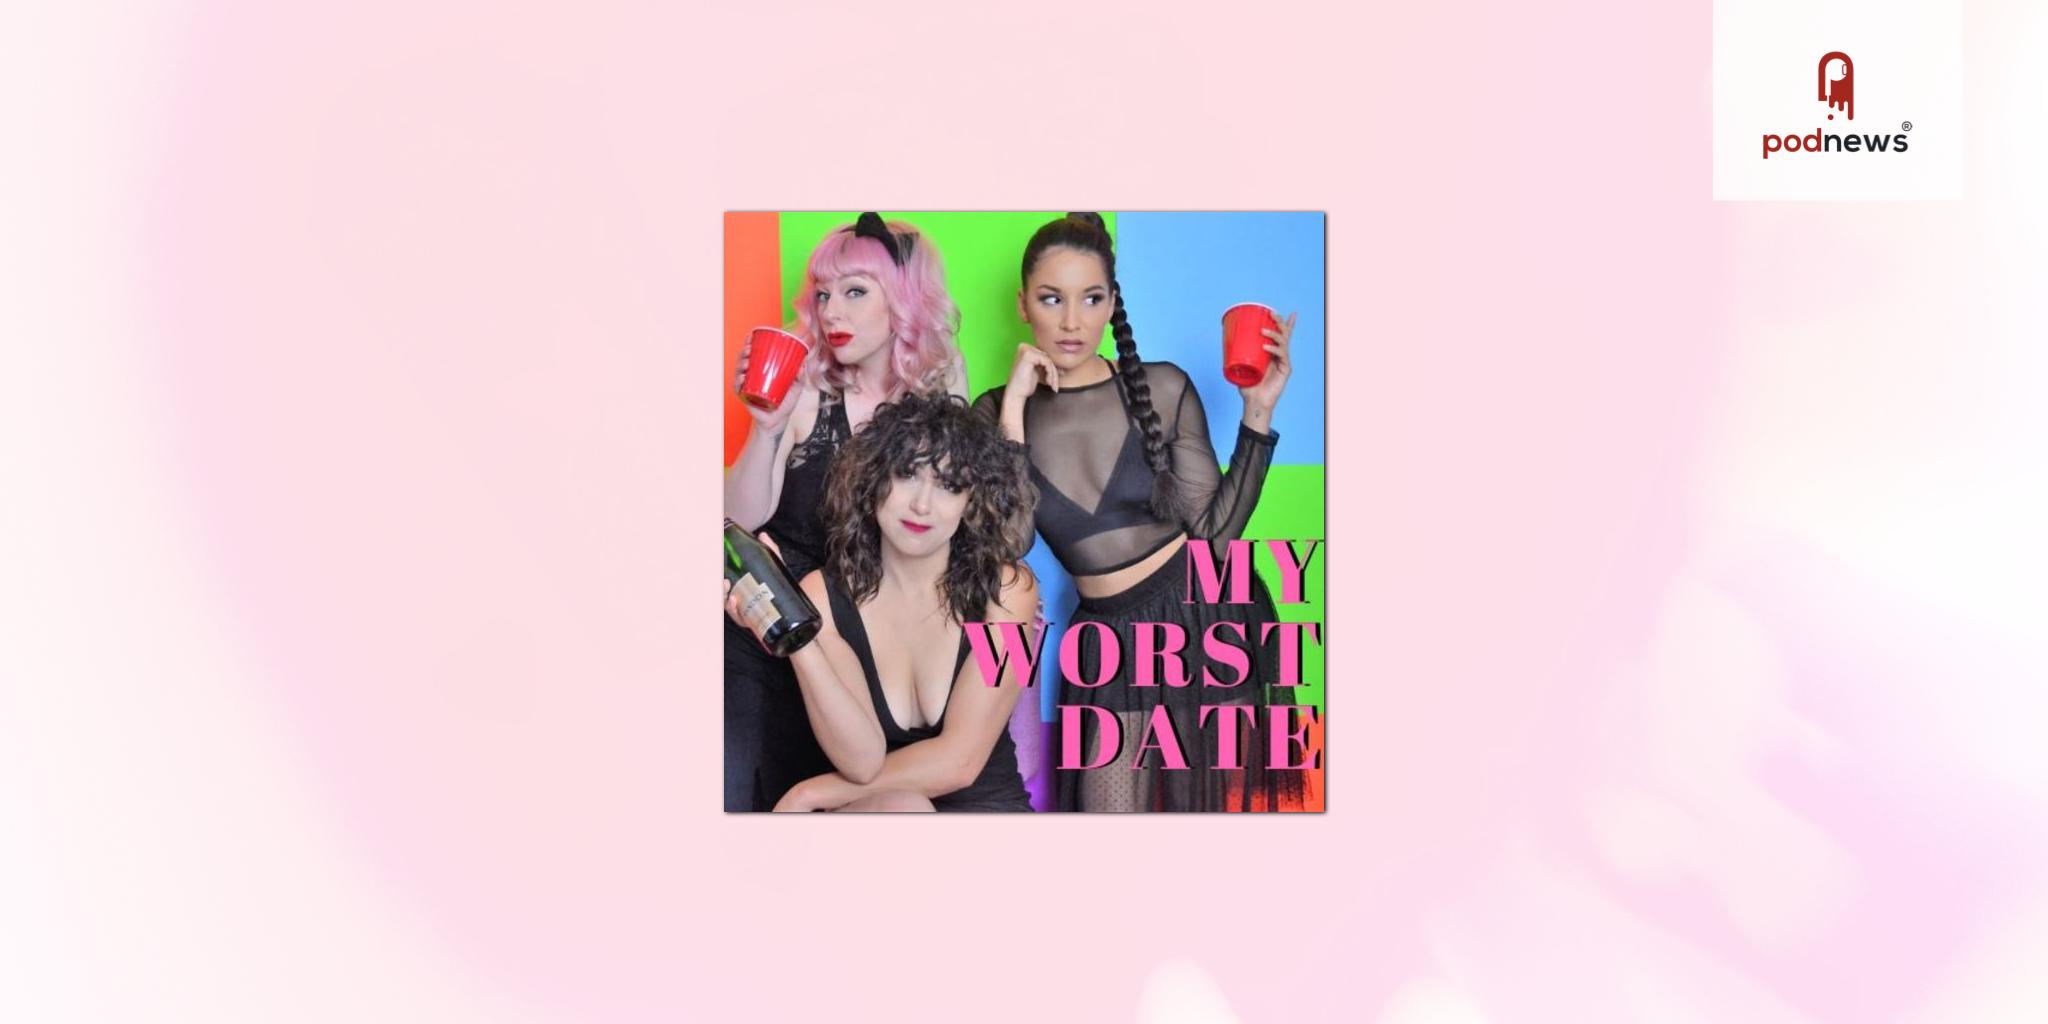 Creators of “My Worst Date” To Launch New Podcast - “Double Dates”